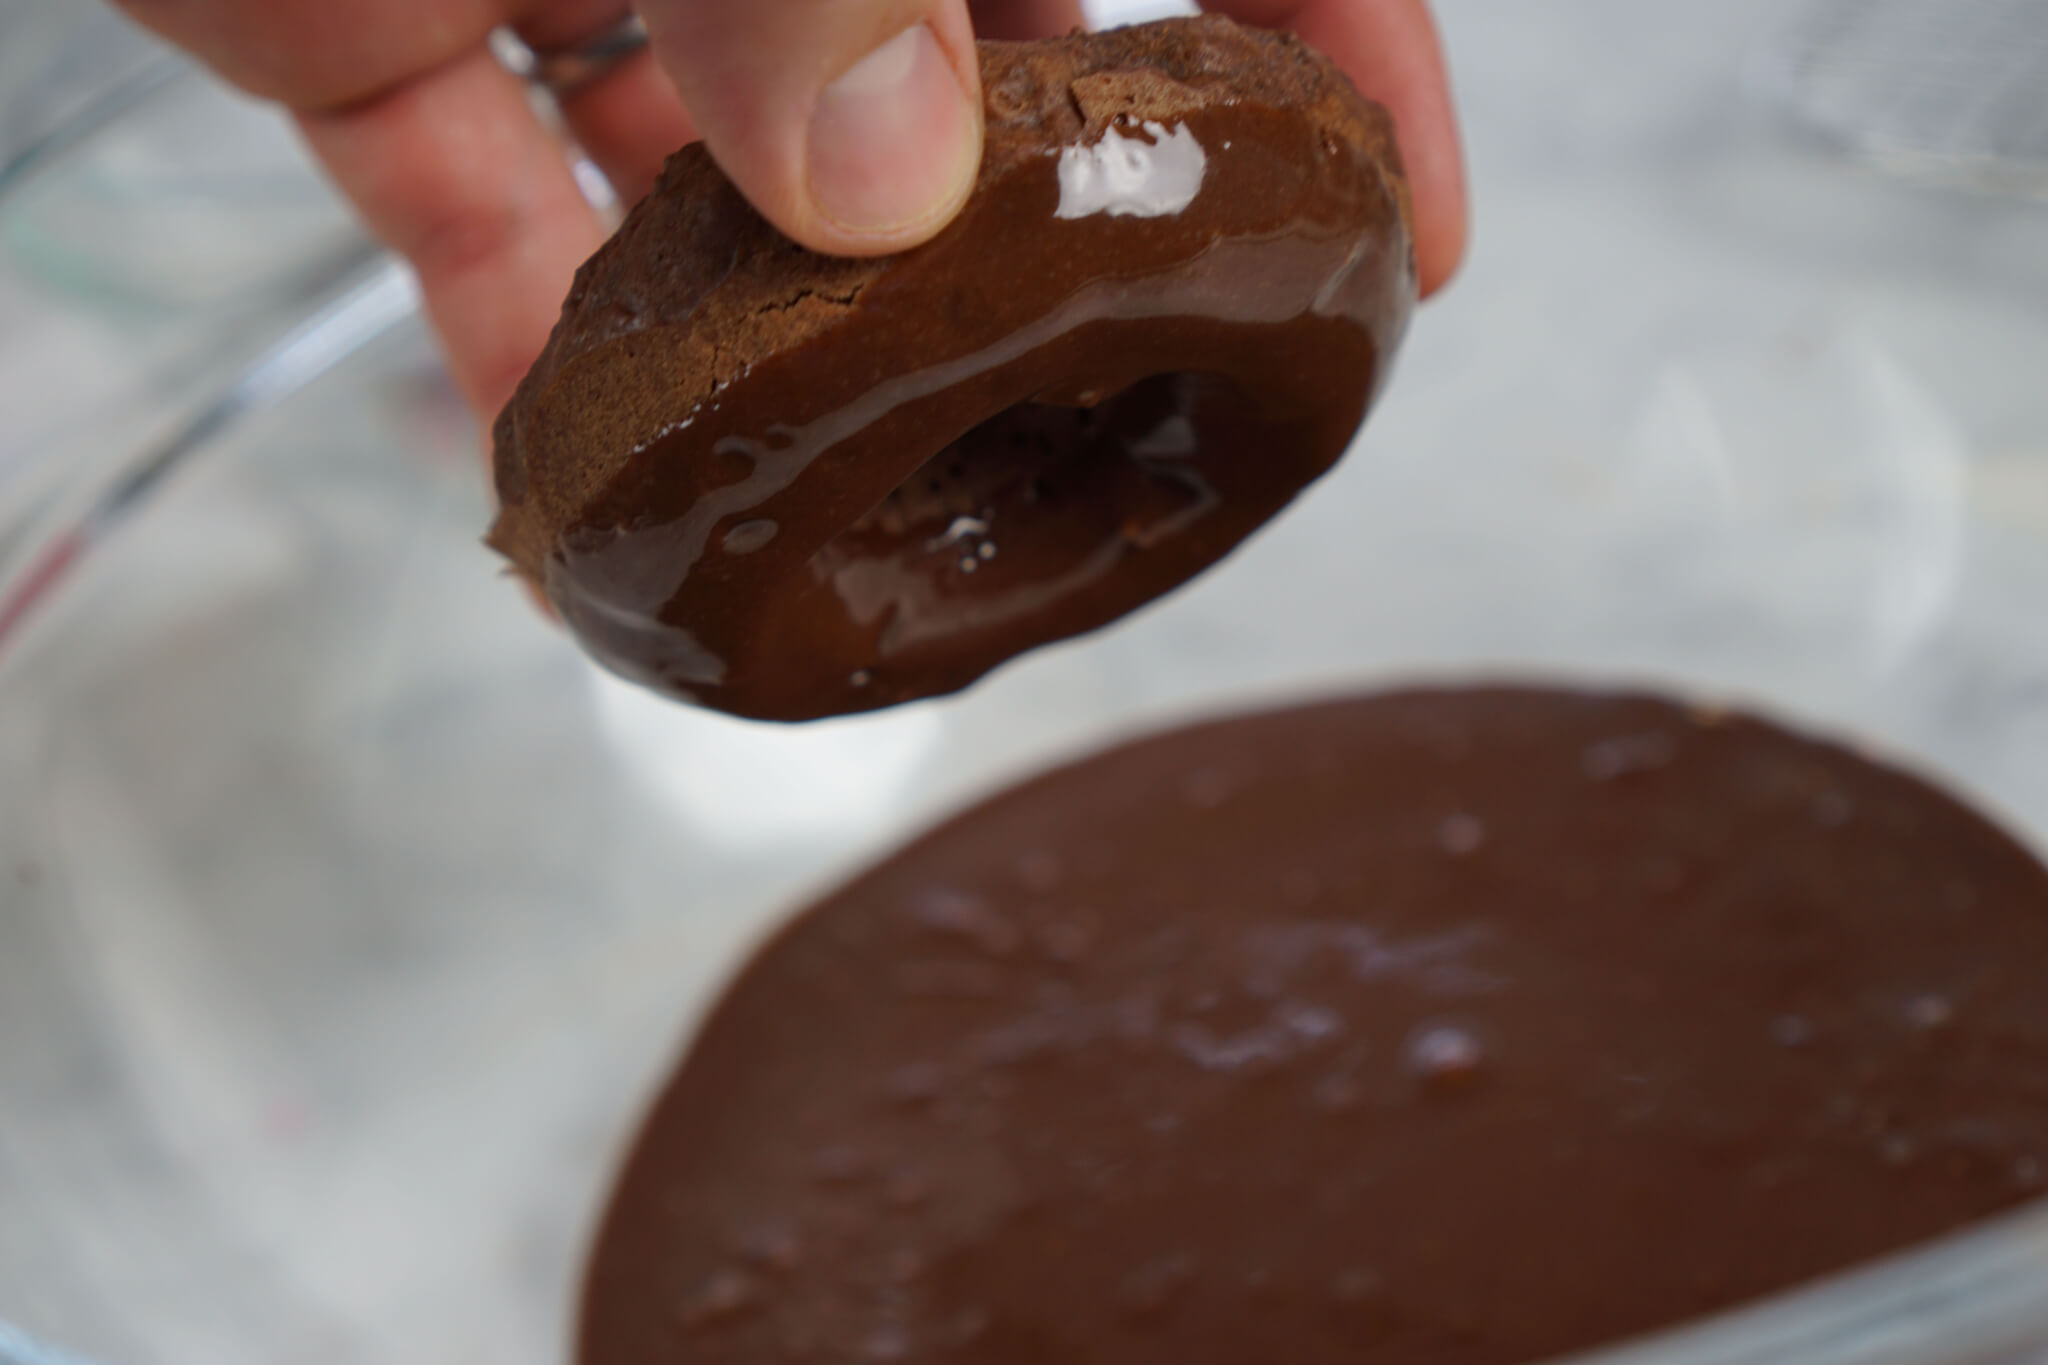 Chocolate donut getting dipped into ganache